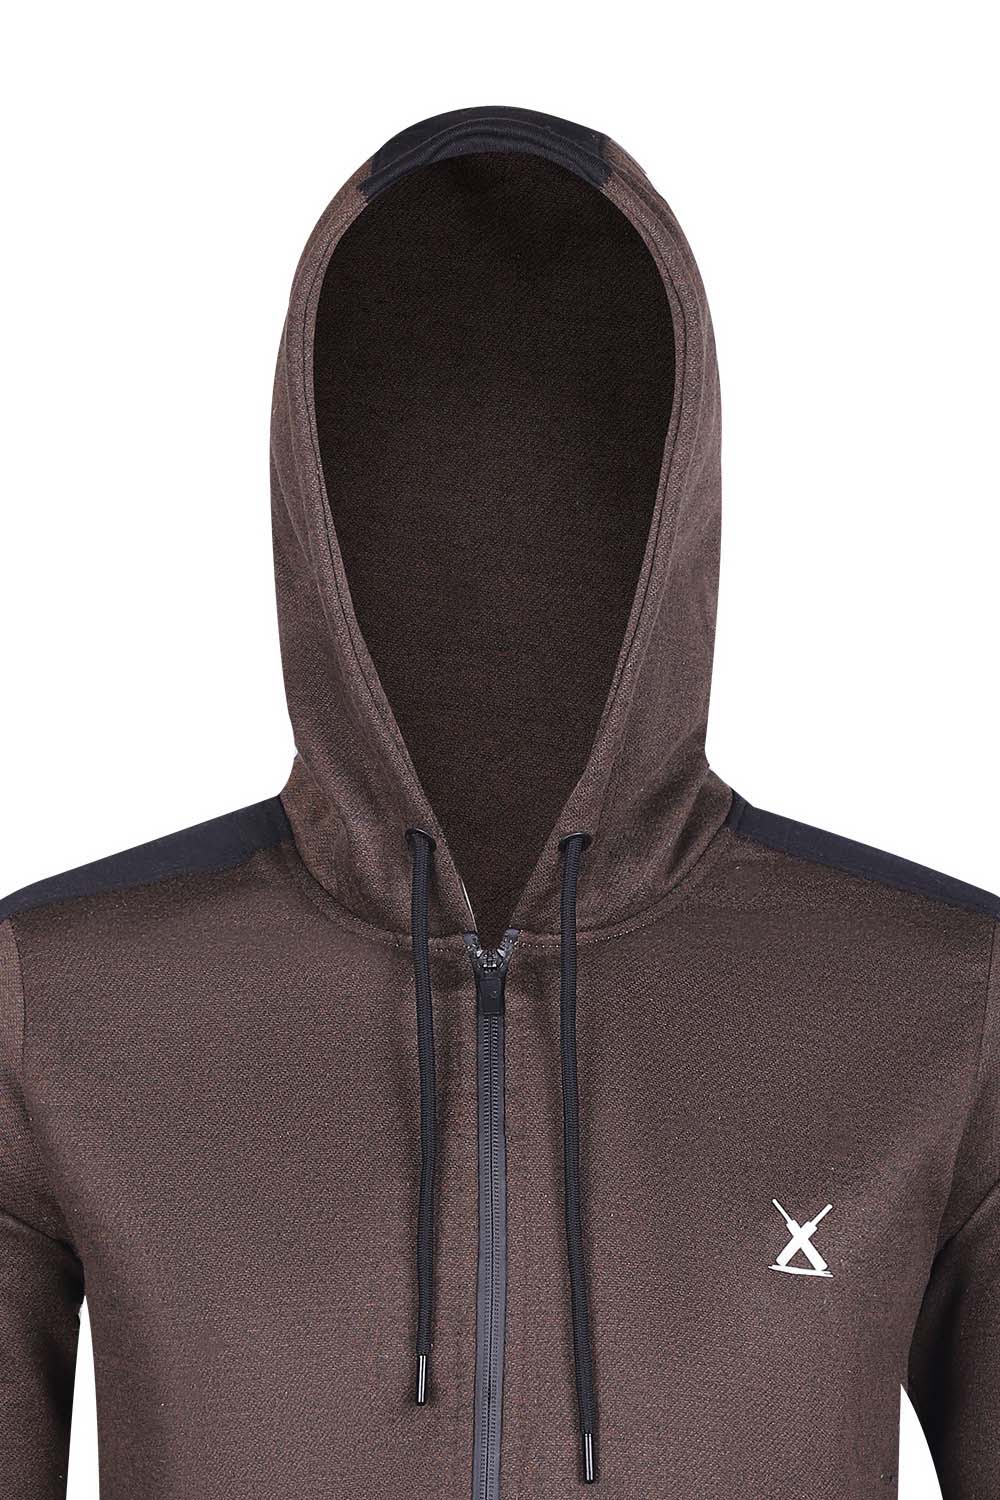 Hope Not Out by Shahid Afridi Men Hoody Premium Zipper Hood with Cut and Sew Panels